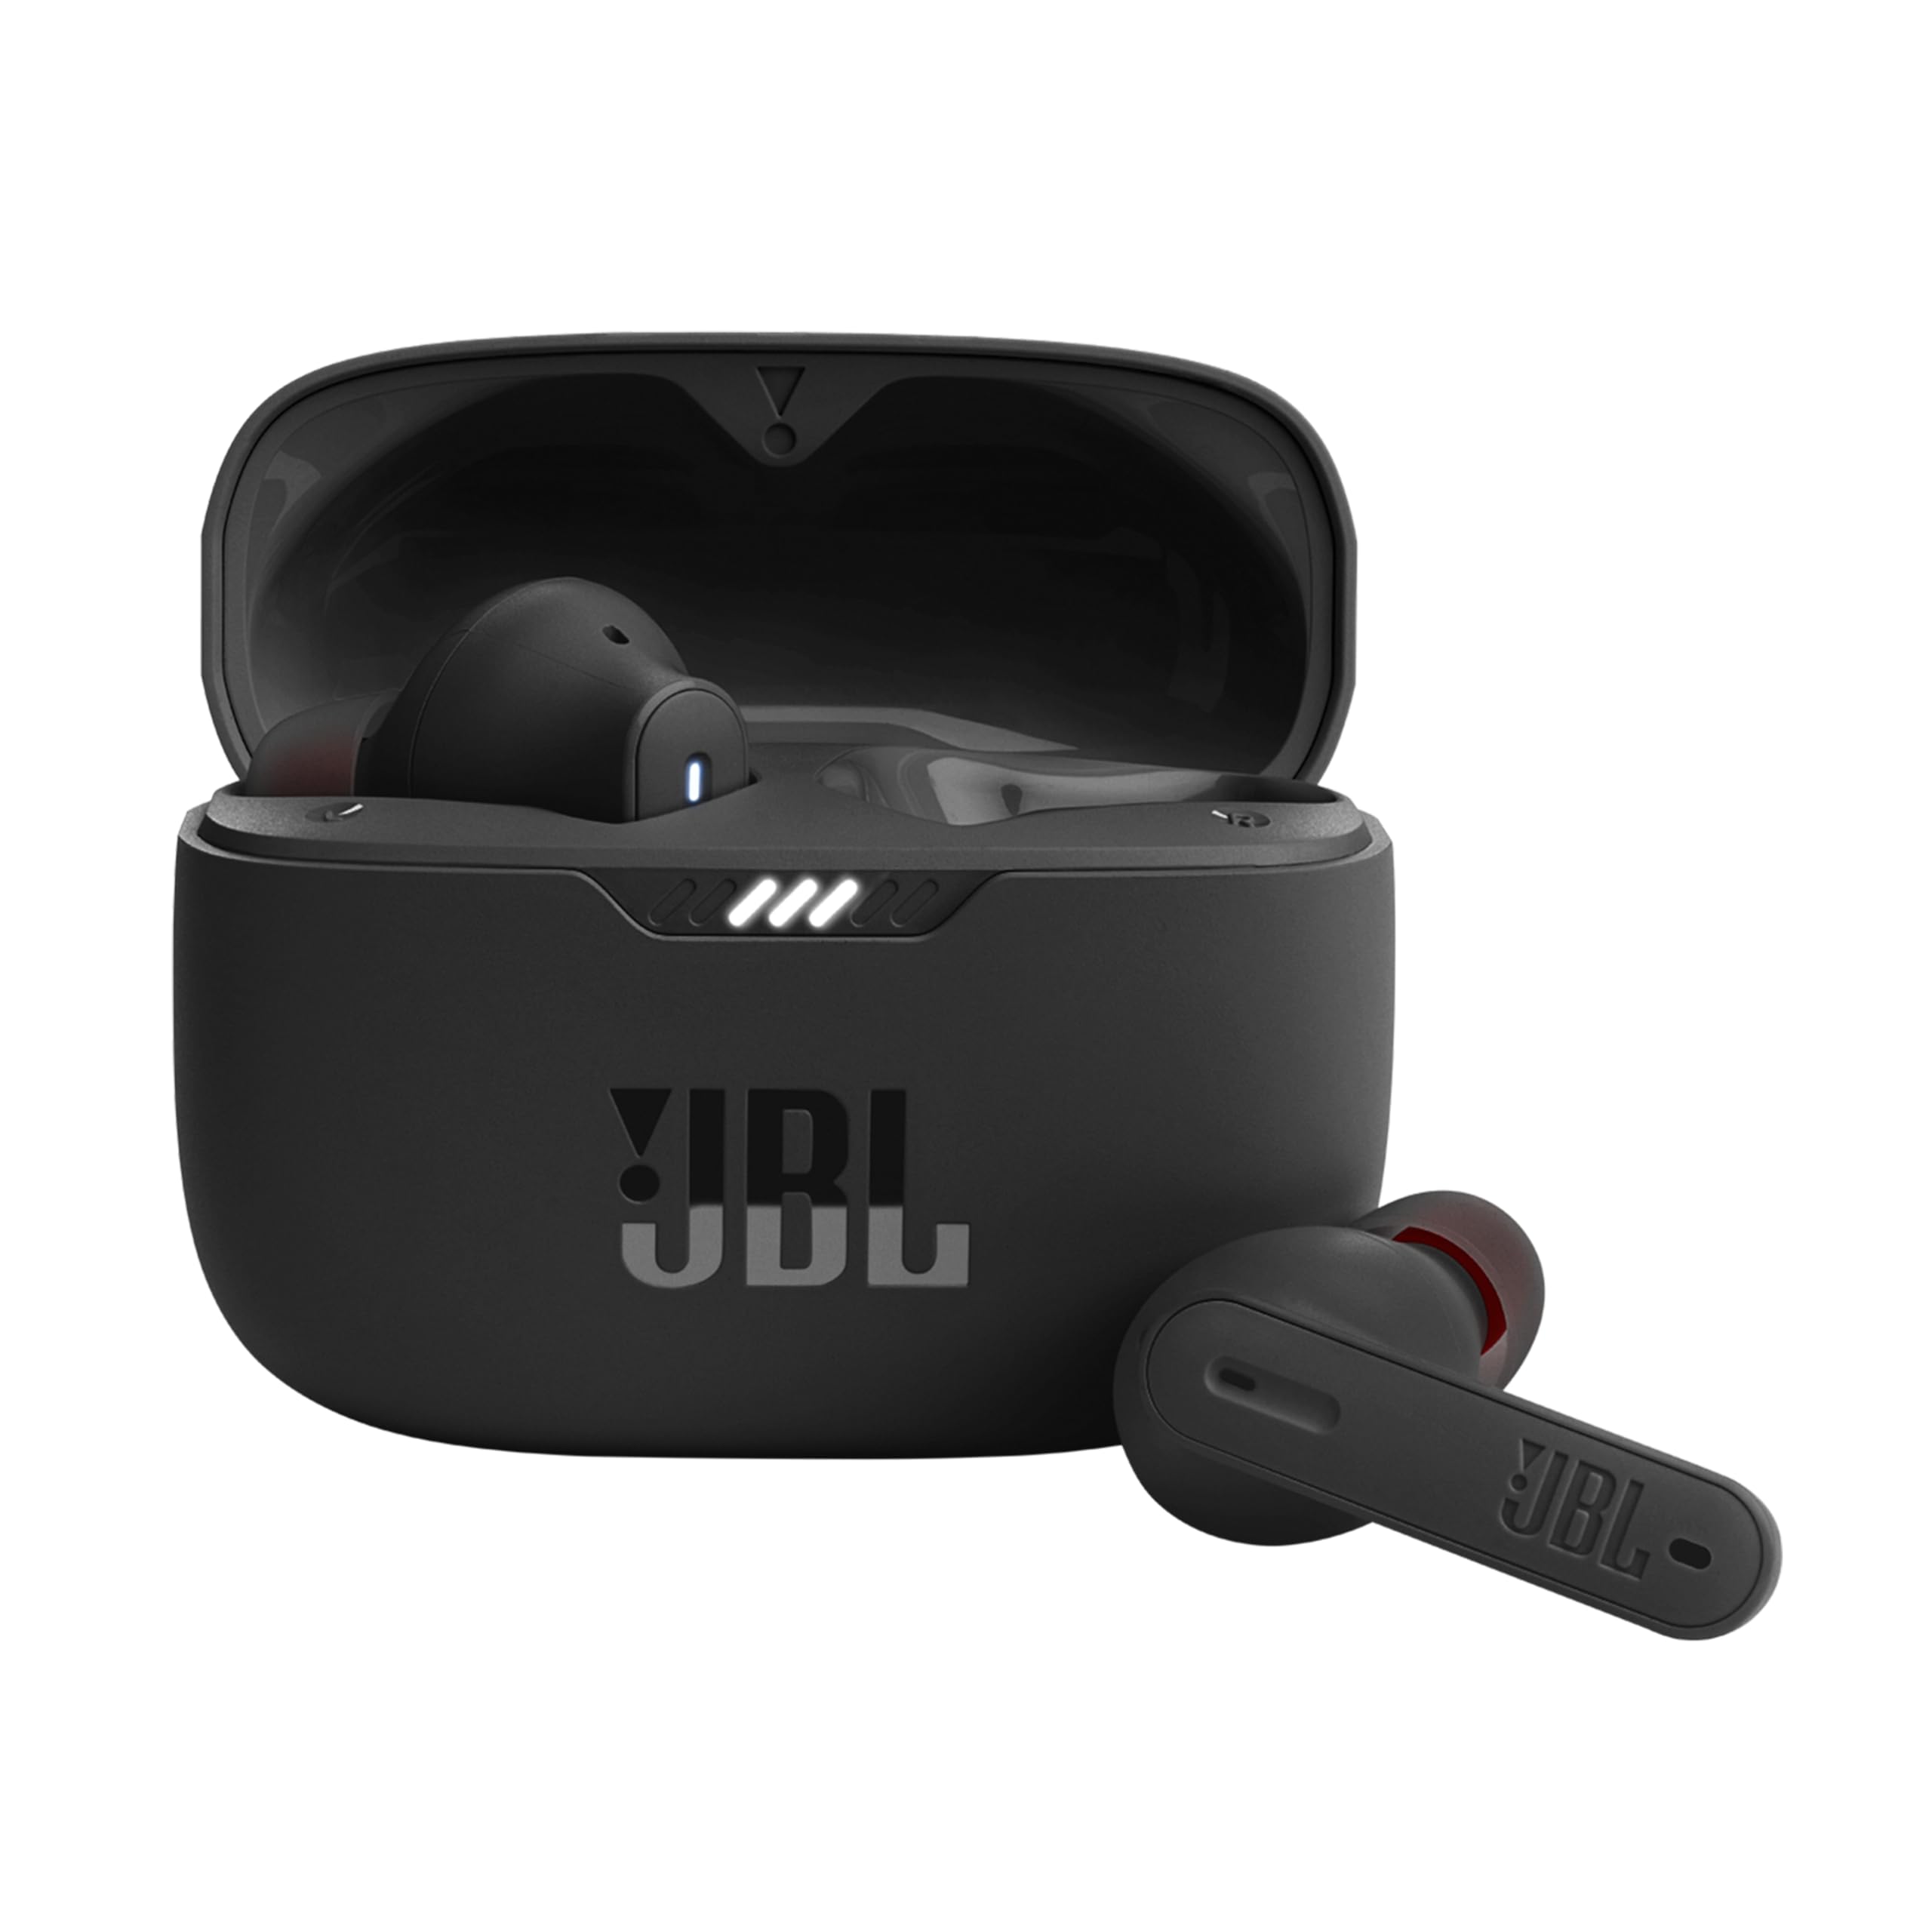 Charging Time For JBL Wireless Earbuds